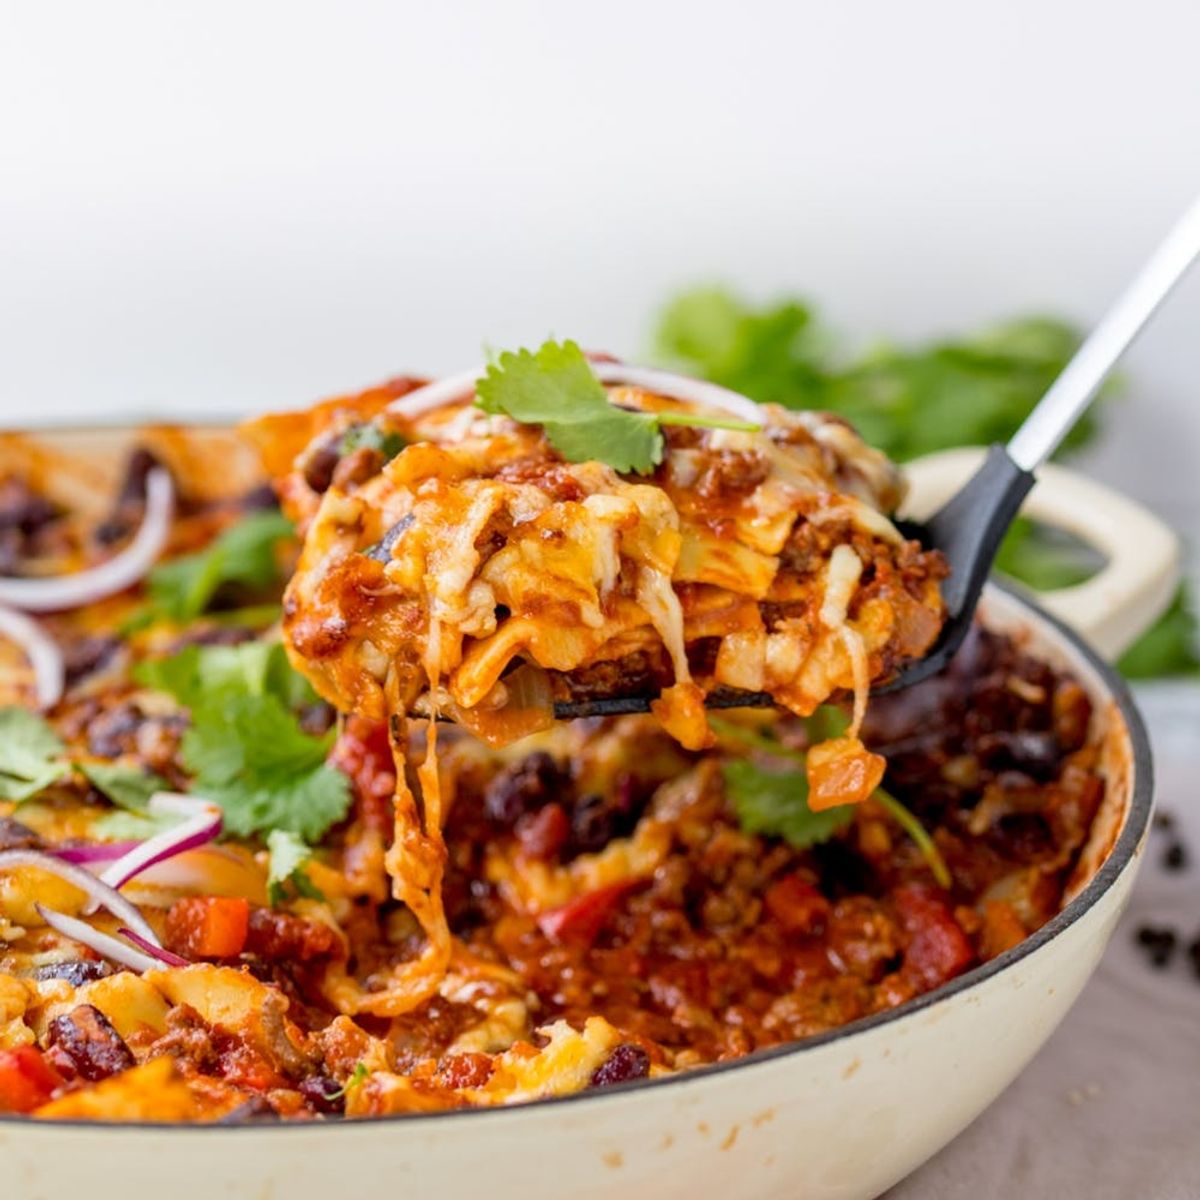 Only 30 Minutes Remain Between You and This Beef Chili Skillet Lasagna Recipe